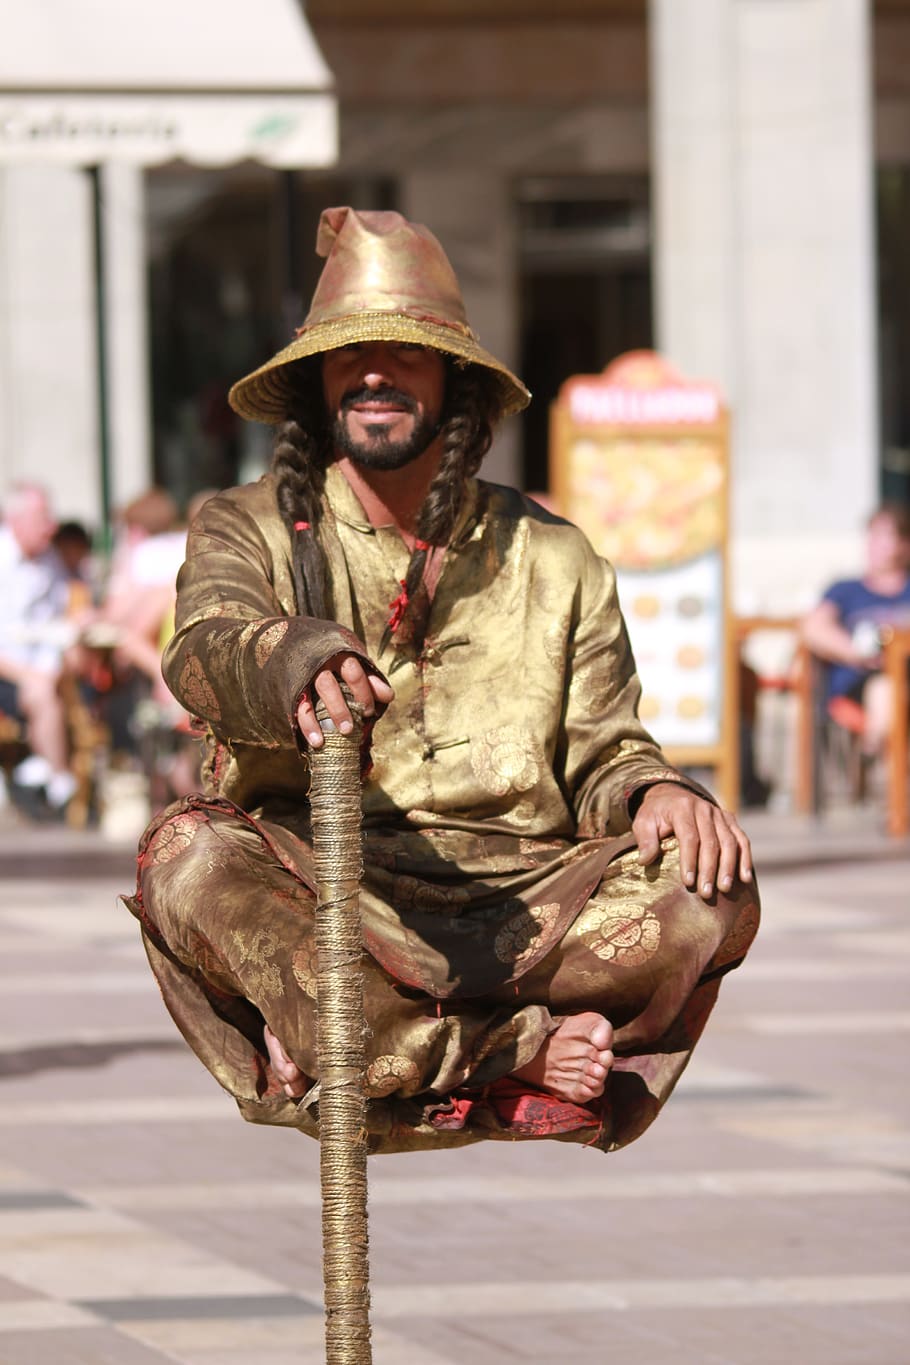 jester, street artists, illusionist, clothing, one person, focus on foreground